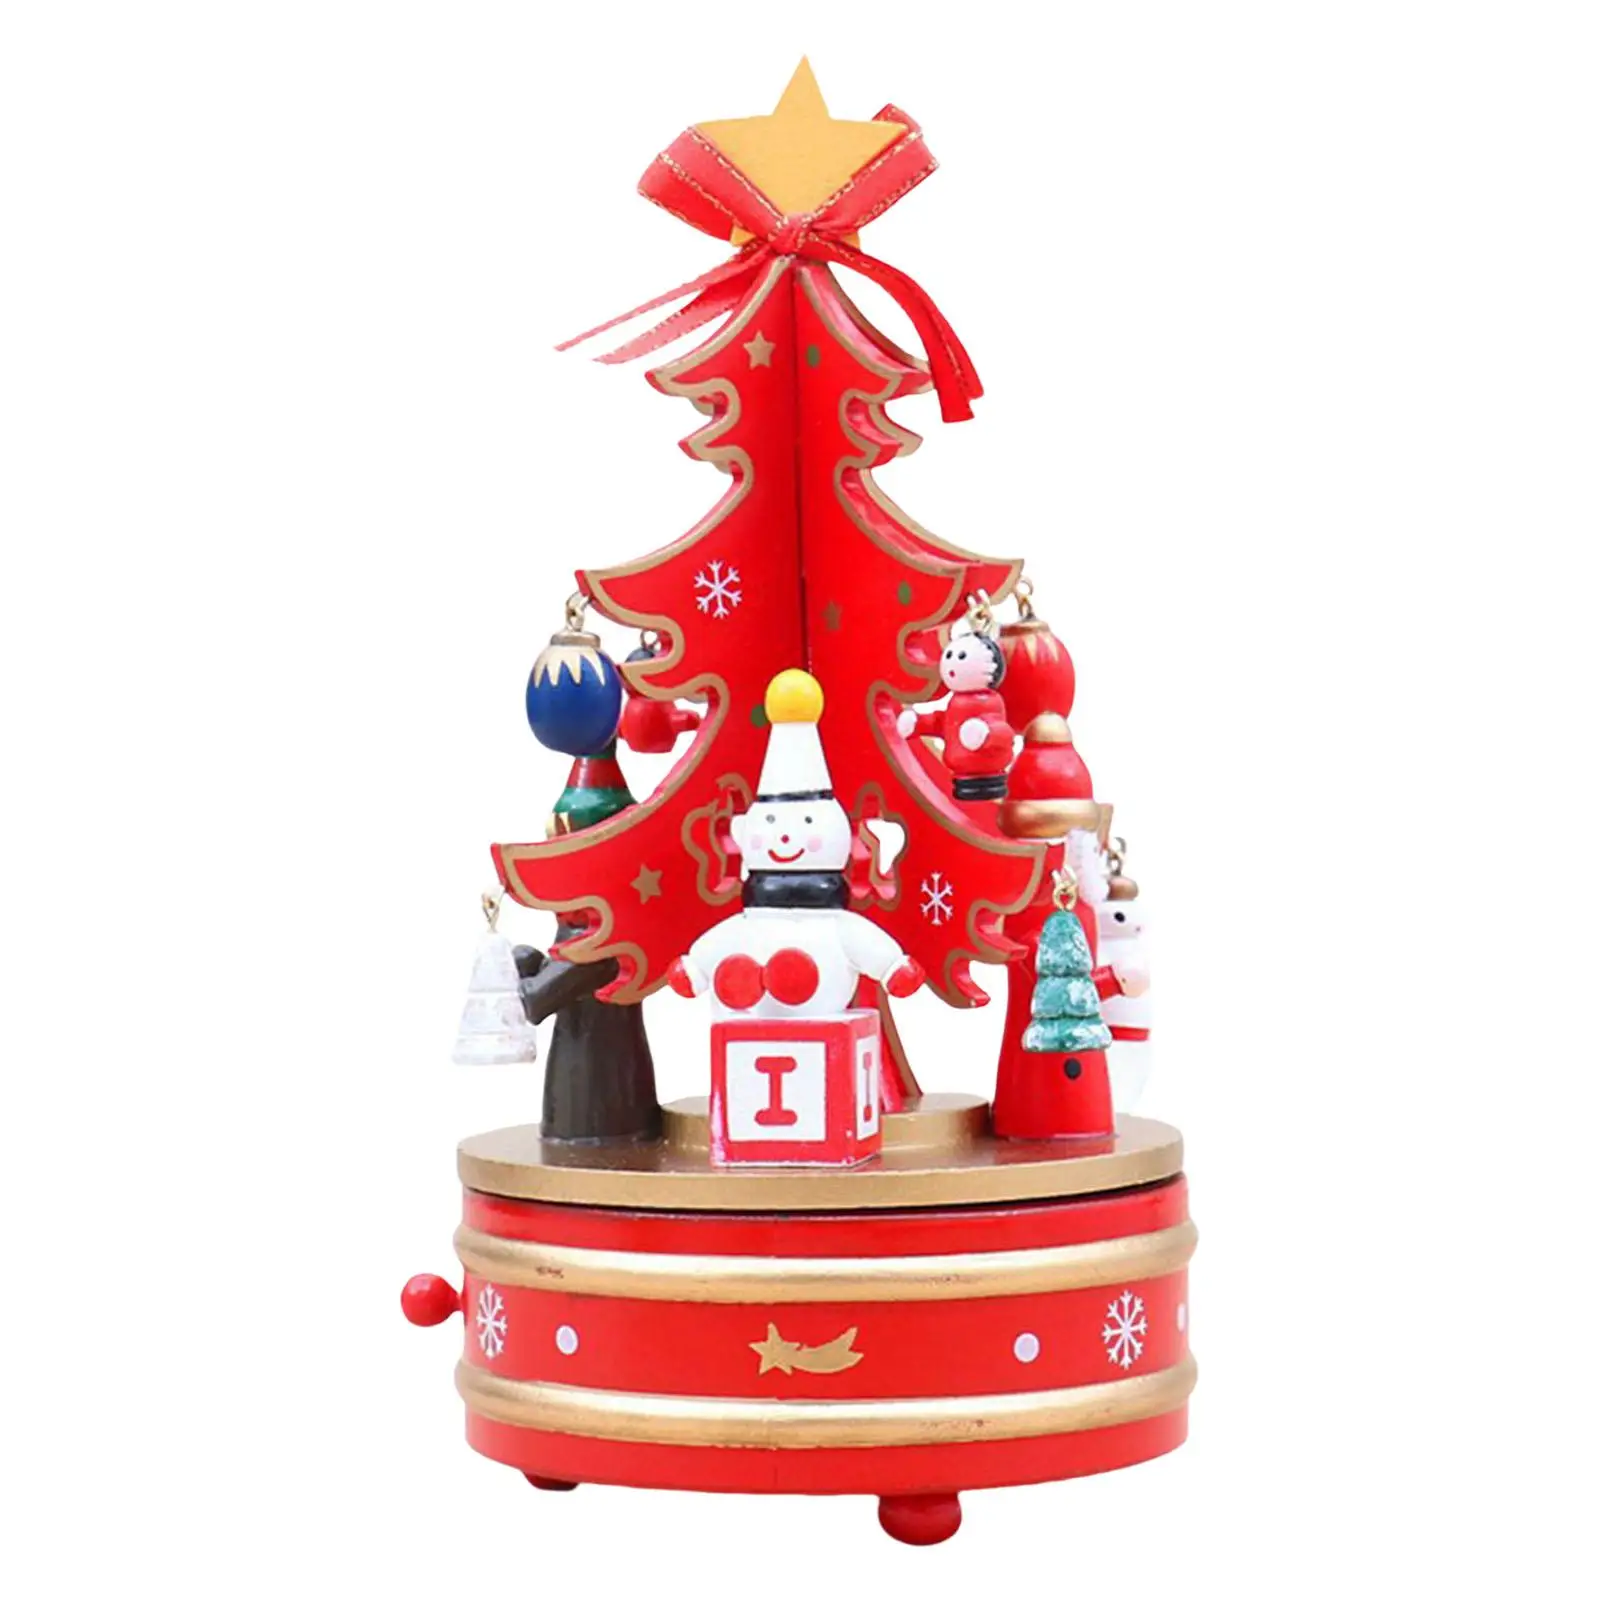 Portable Wooden Music Box Rotatable Carousel for Party Home Decor